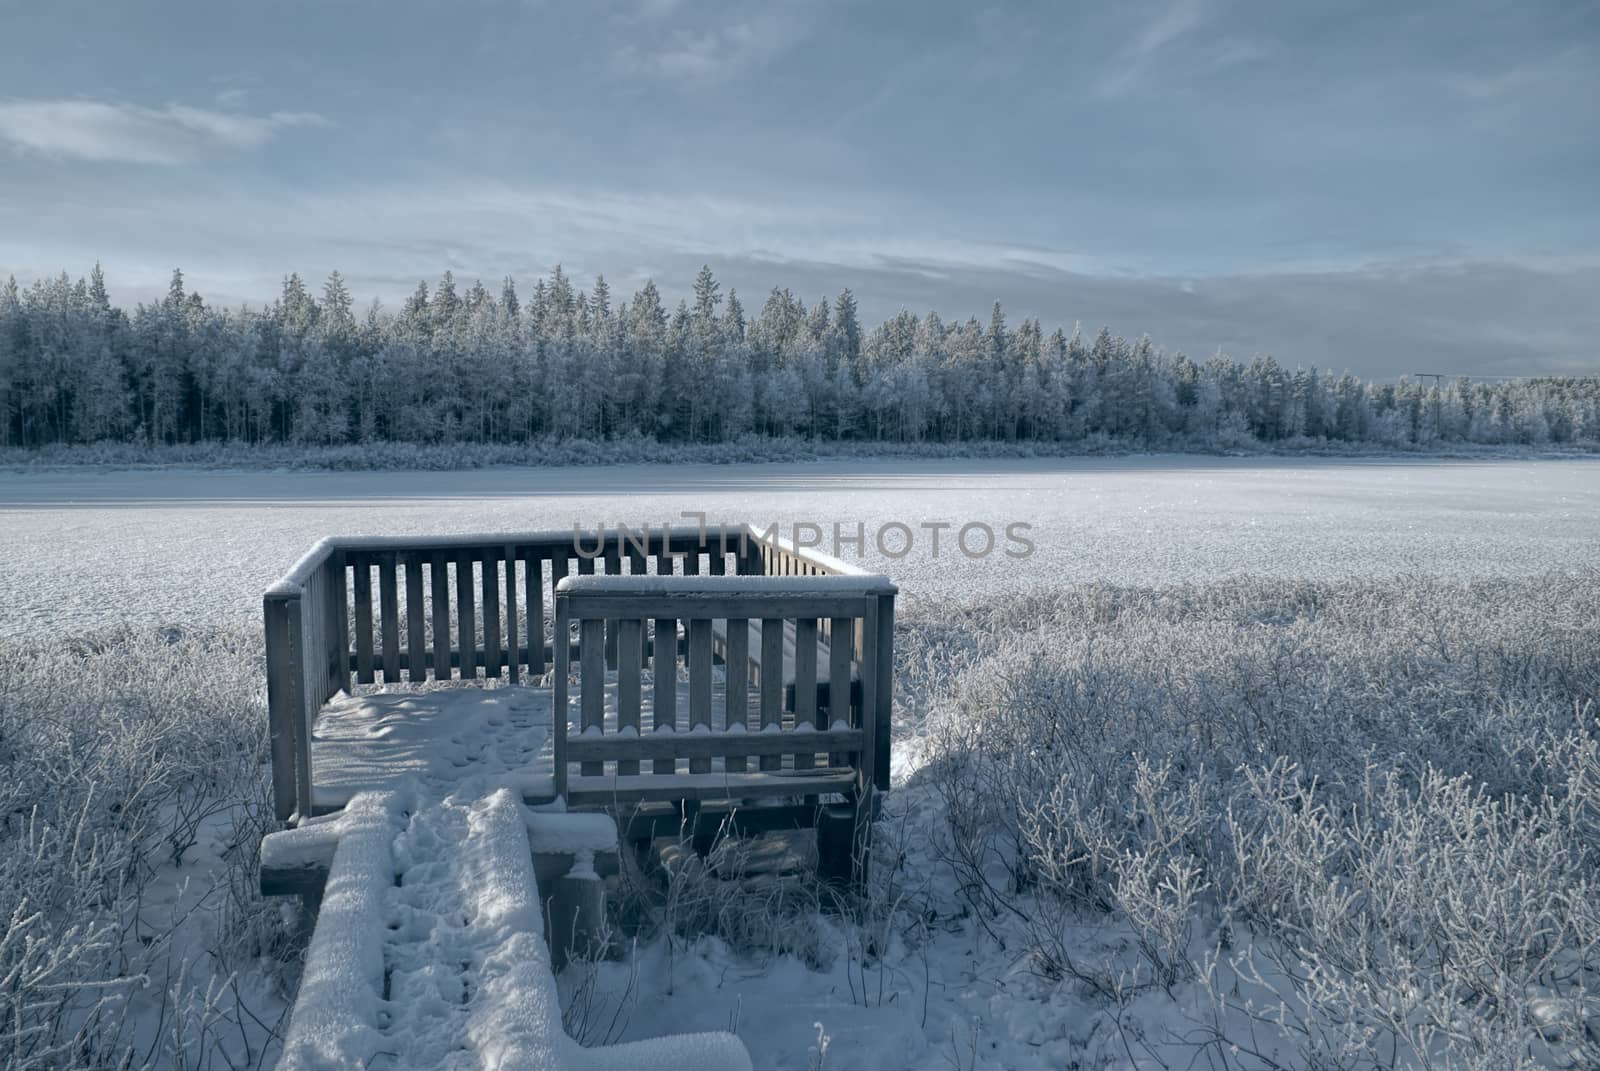 Gloomy view of a frozen forest and a wooden viewpoint